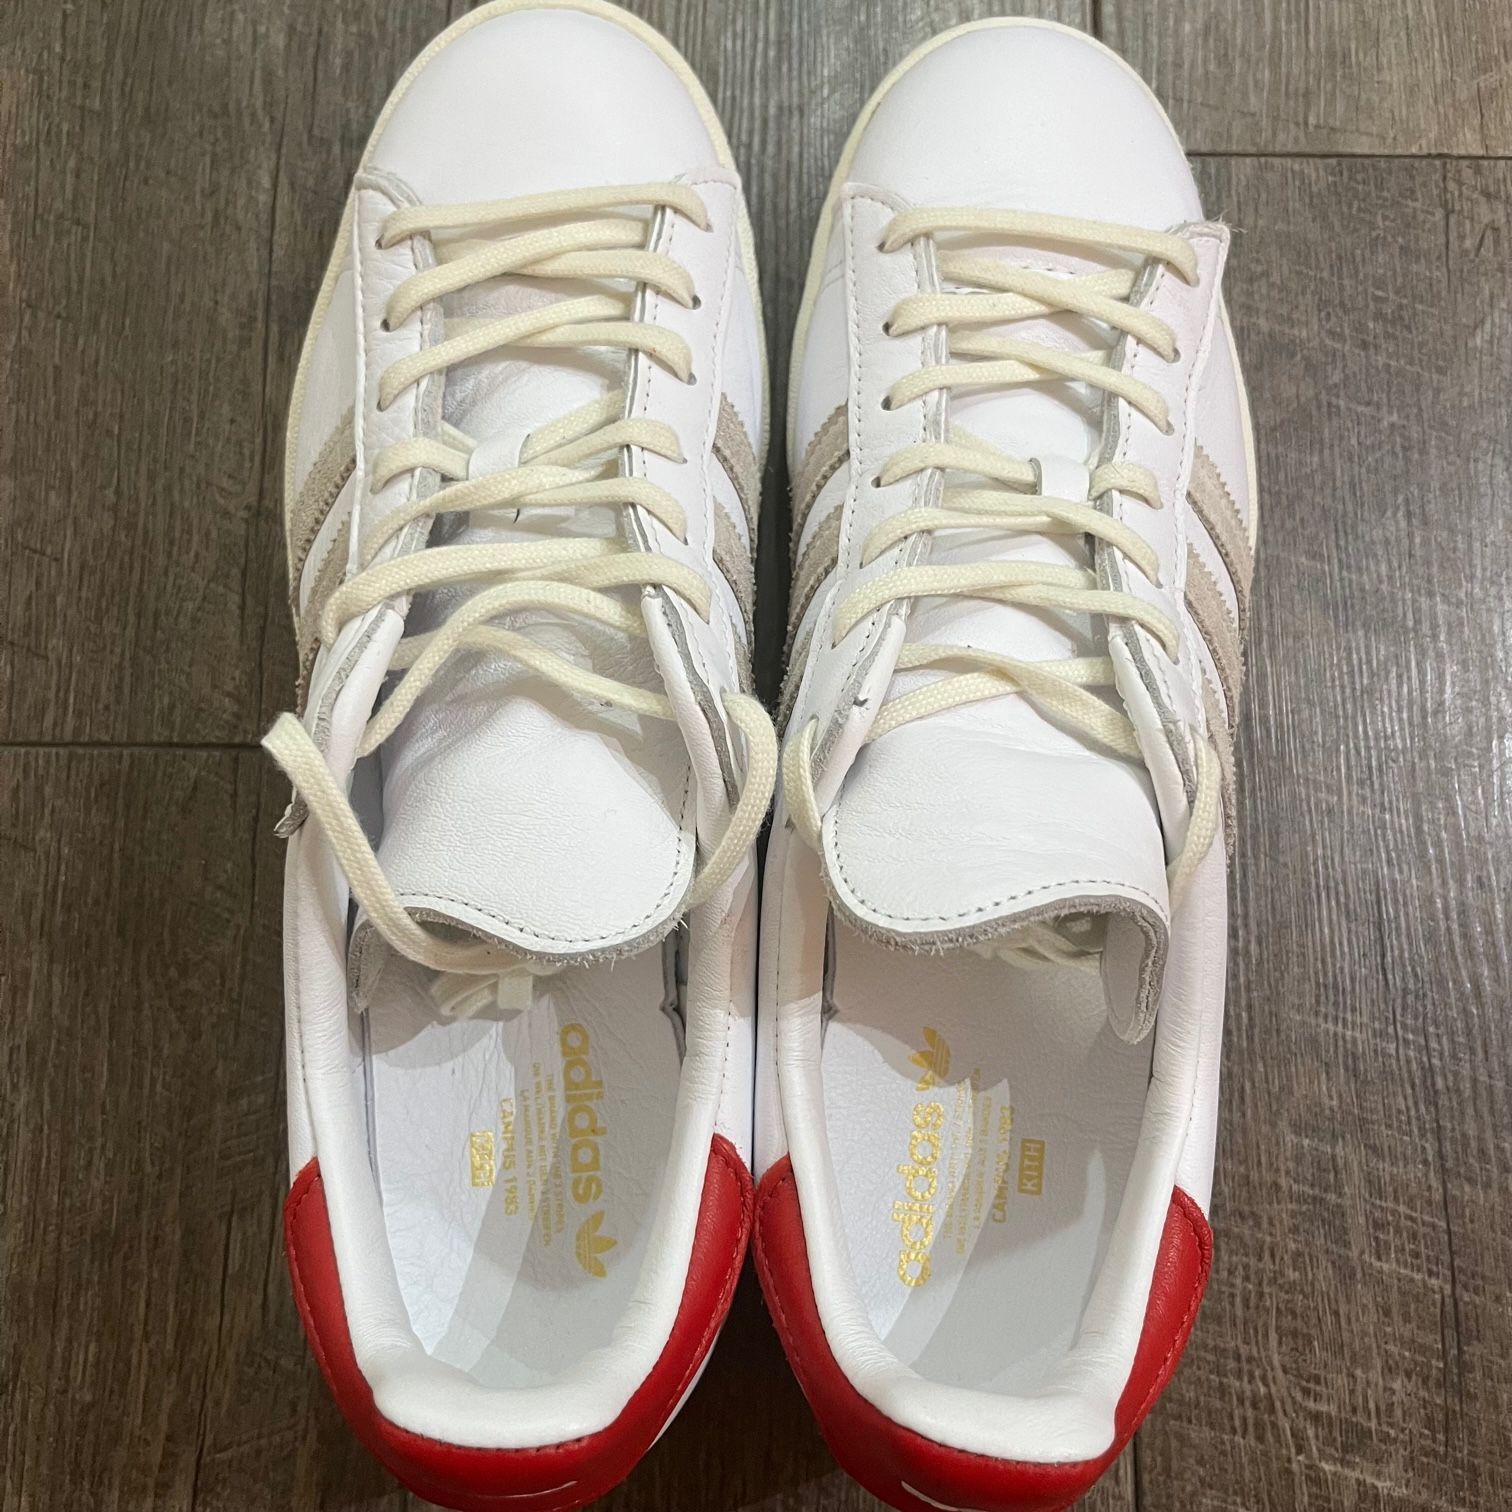 【ADIDAS×KITH】GY2542 CAMPUS 80sキャンパススニーカー